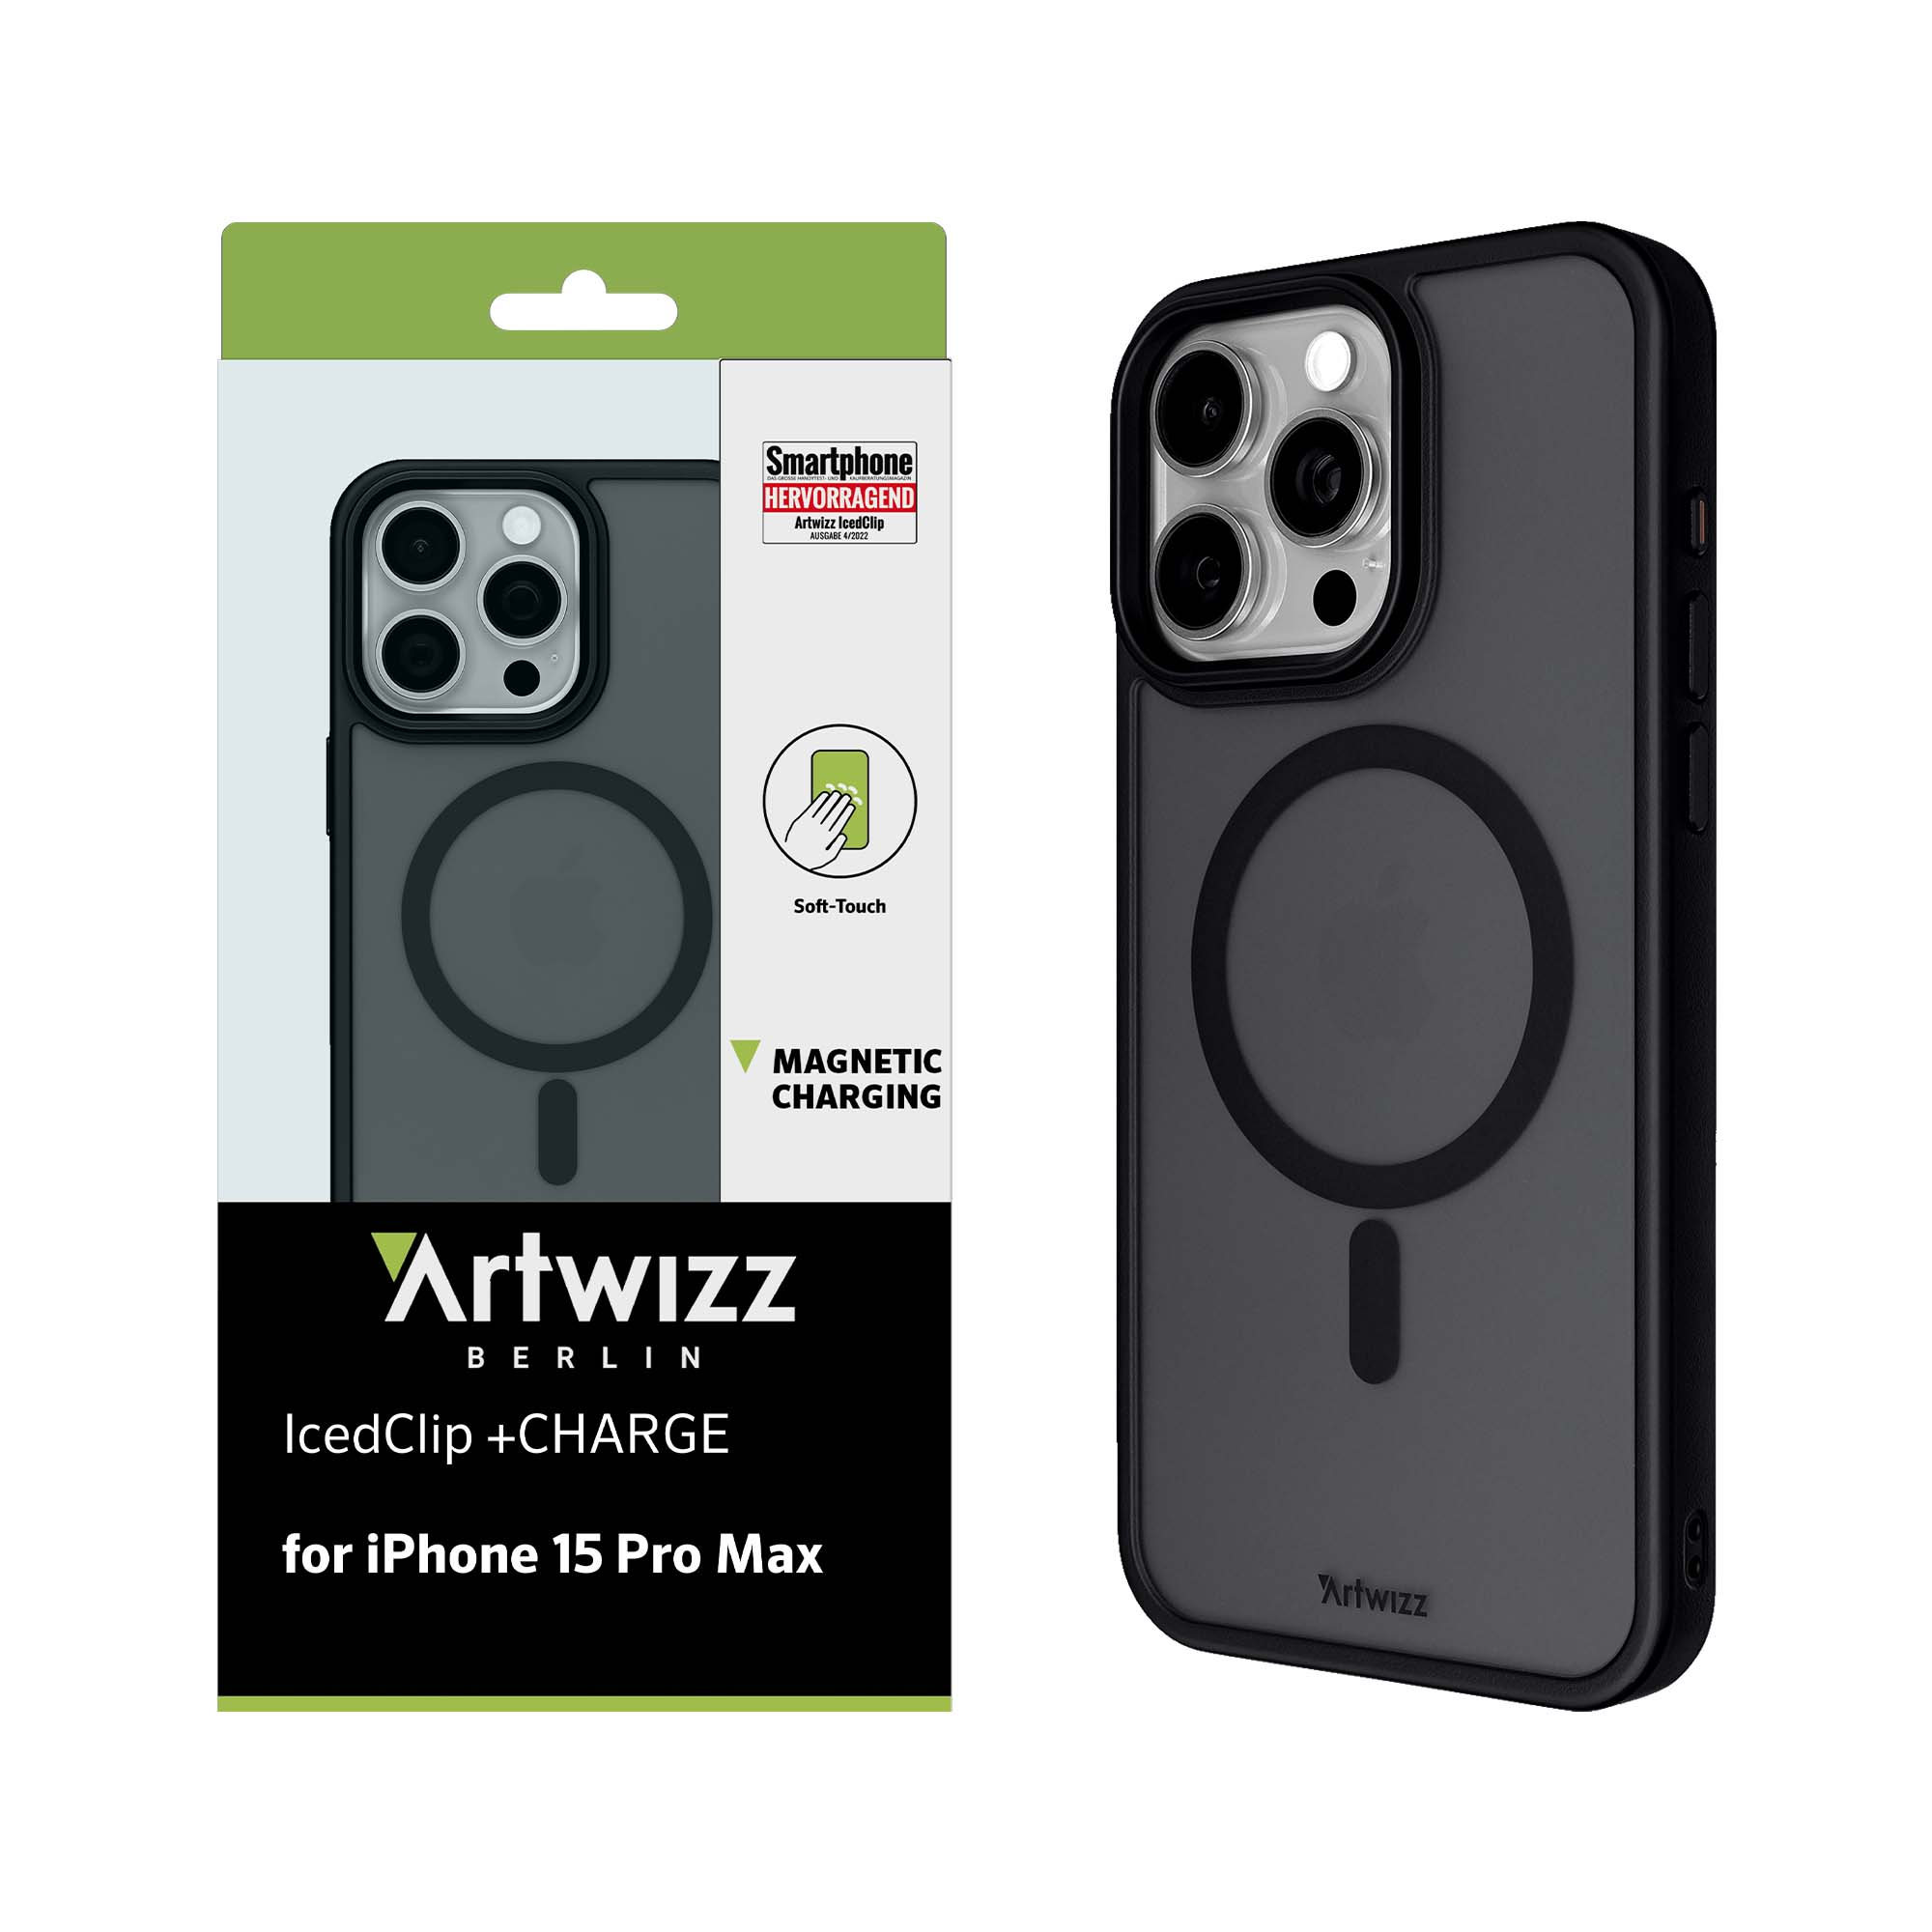 ARTWIZZ IcedClip +CHARGE, Backcover, iPhone Schwarz Pro Max, 15 Apple